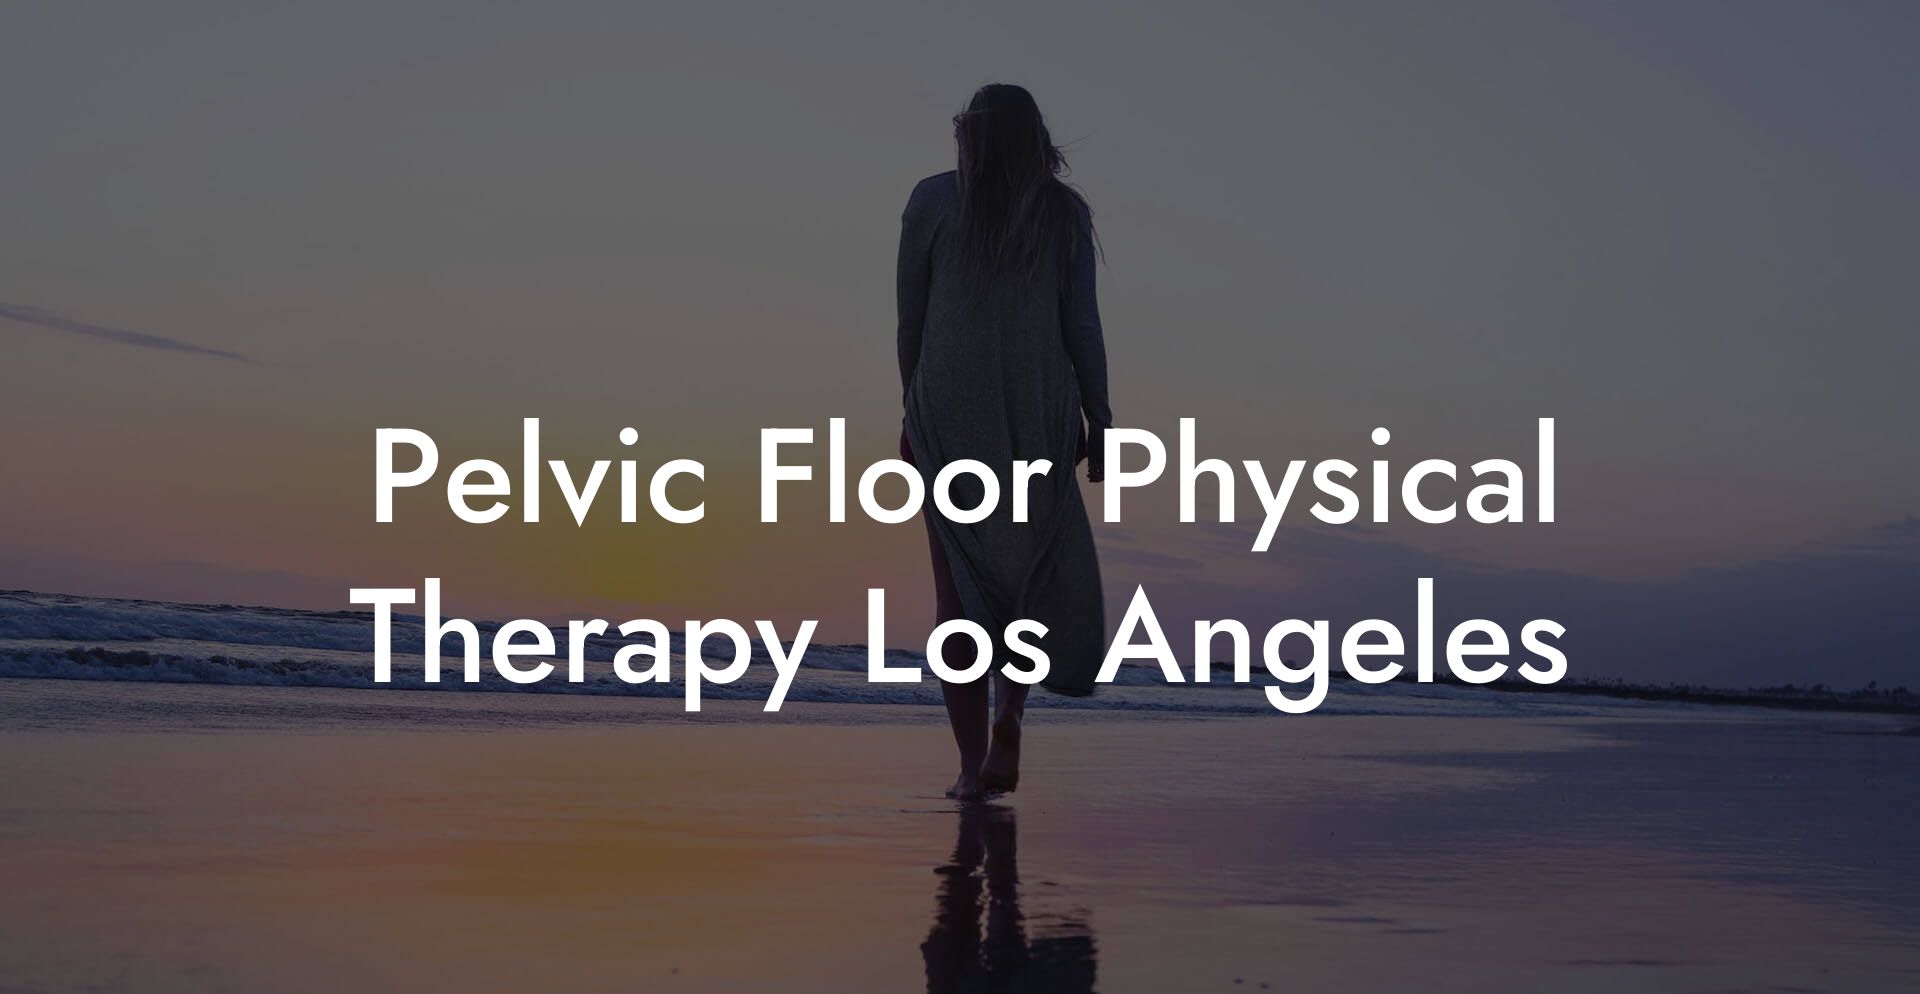 Pelvic Floor Physical Therapy Los Angeles